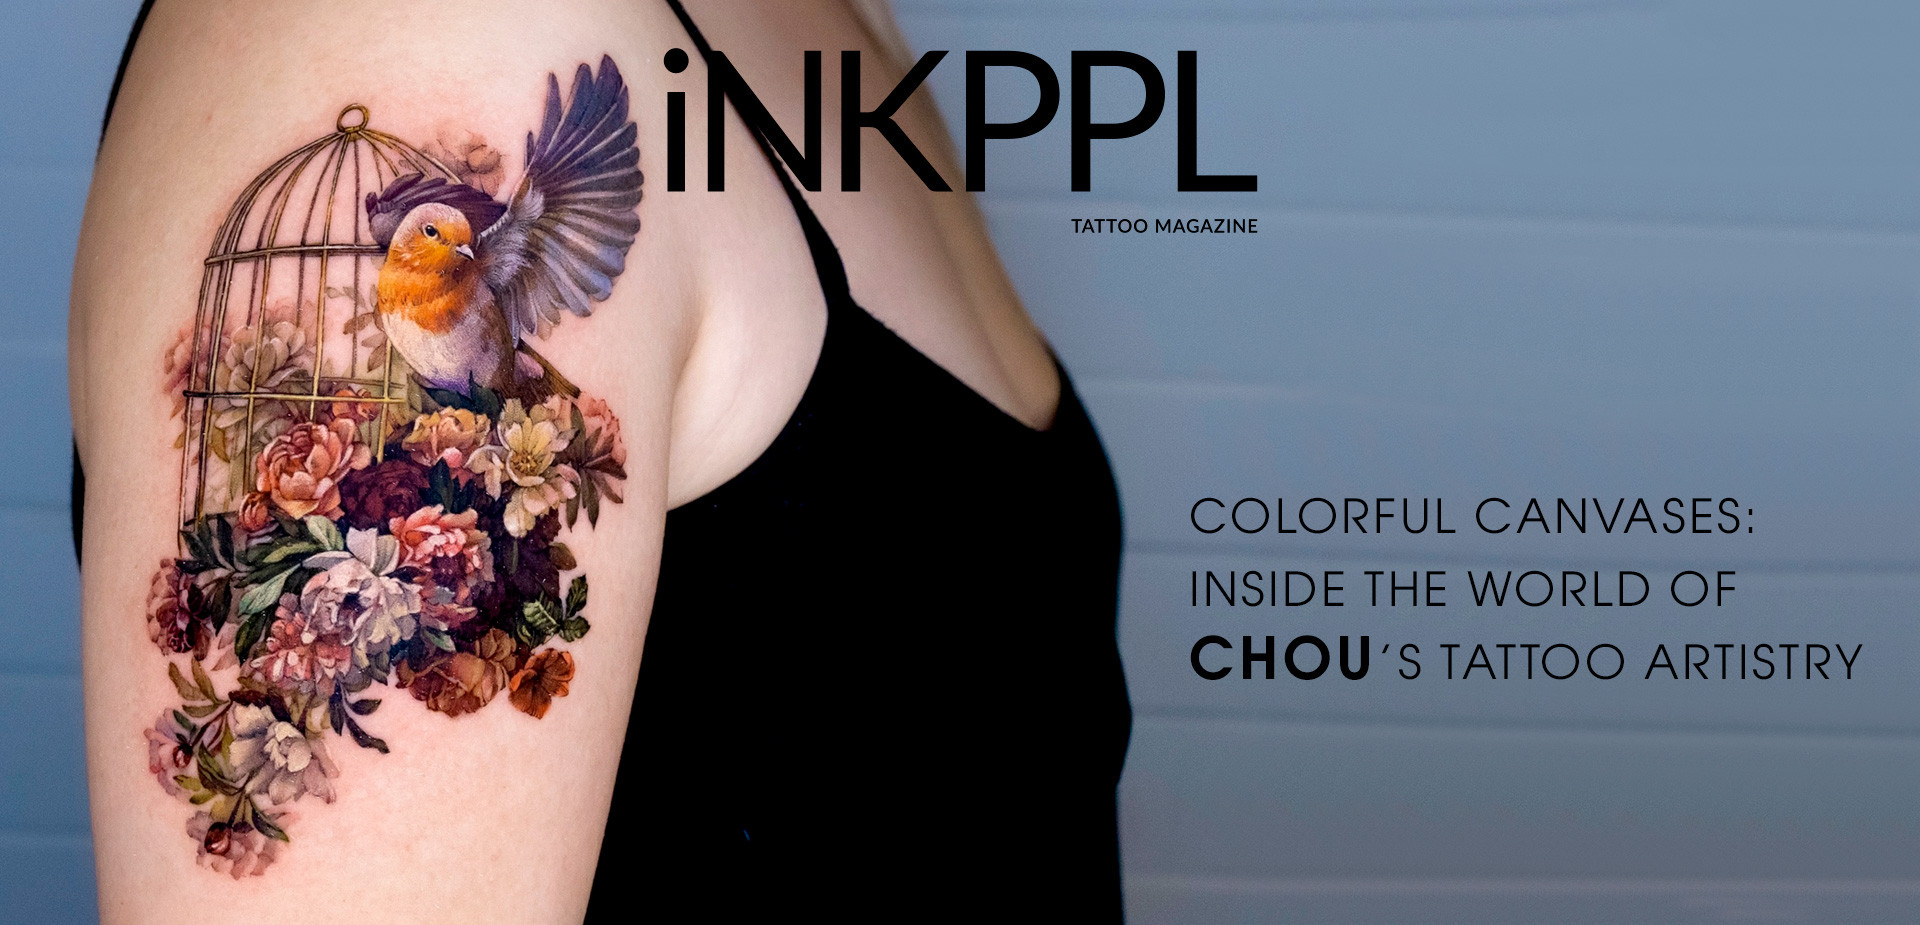 Colorful Canvases: Inside the World of Chou's Tattoo Artistry